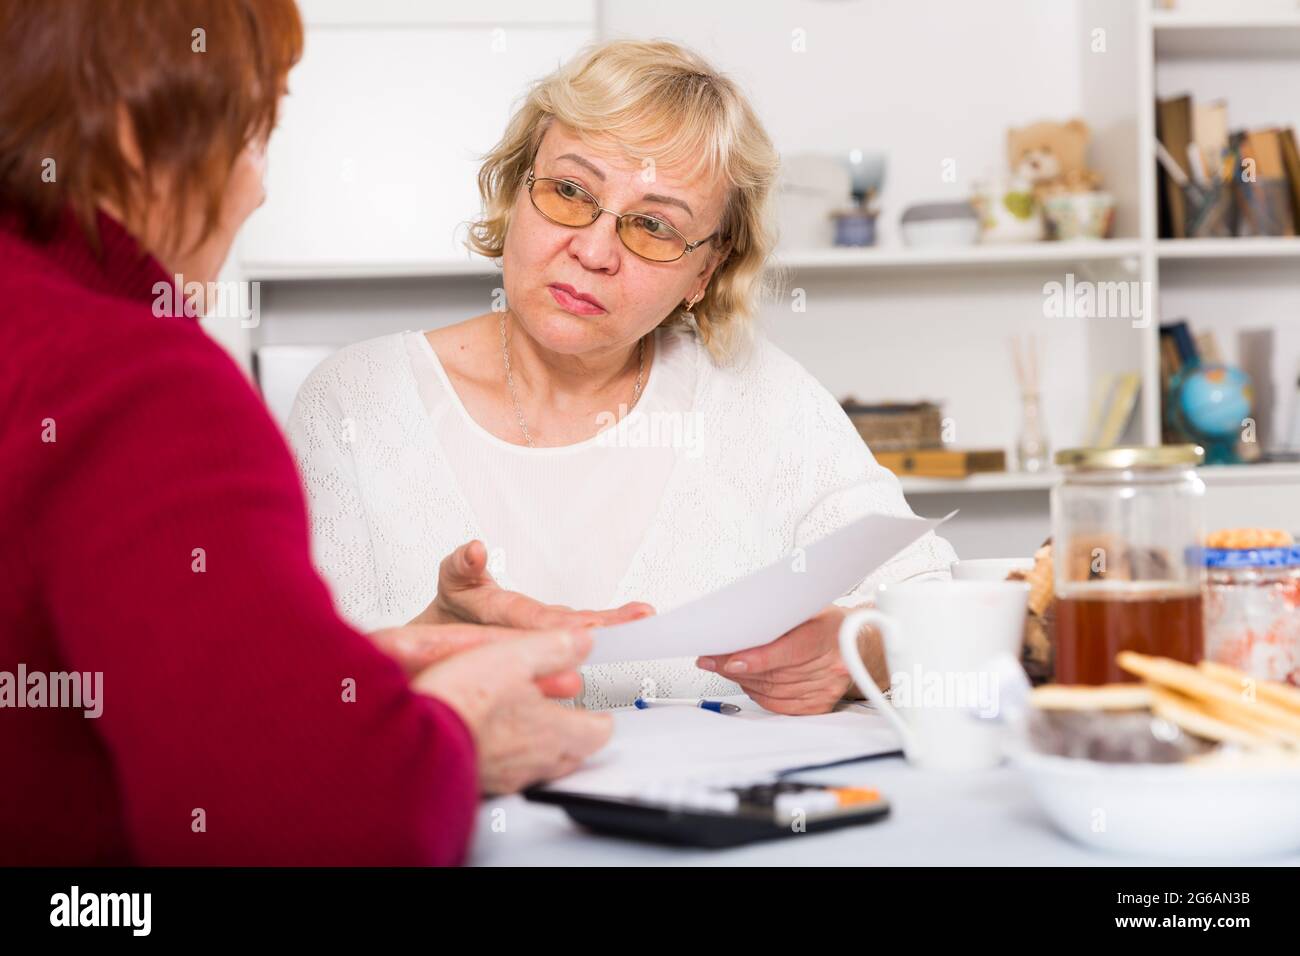 Serious old women with public utilities Stock Photo